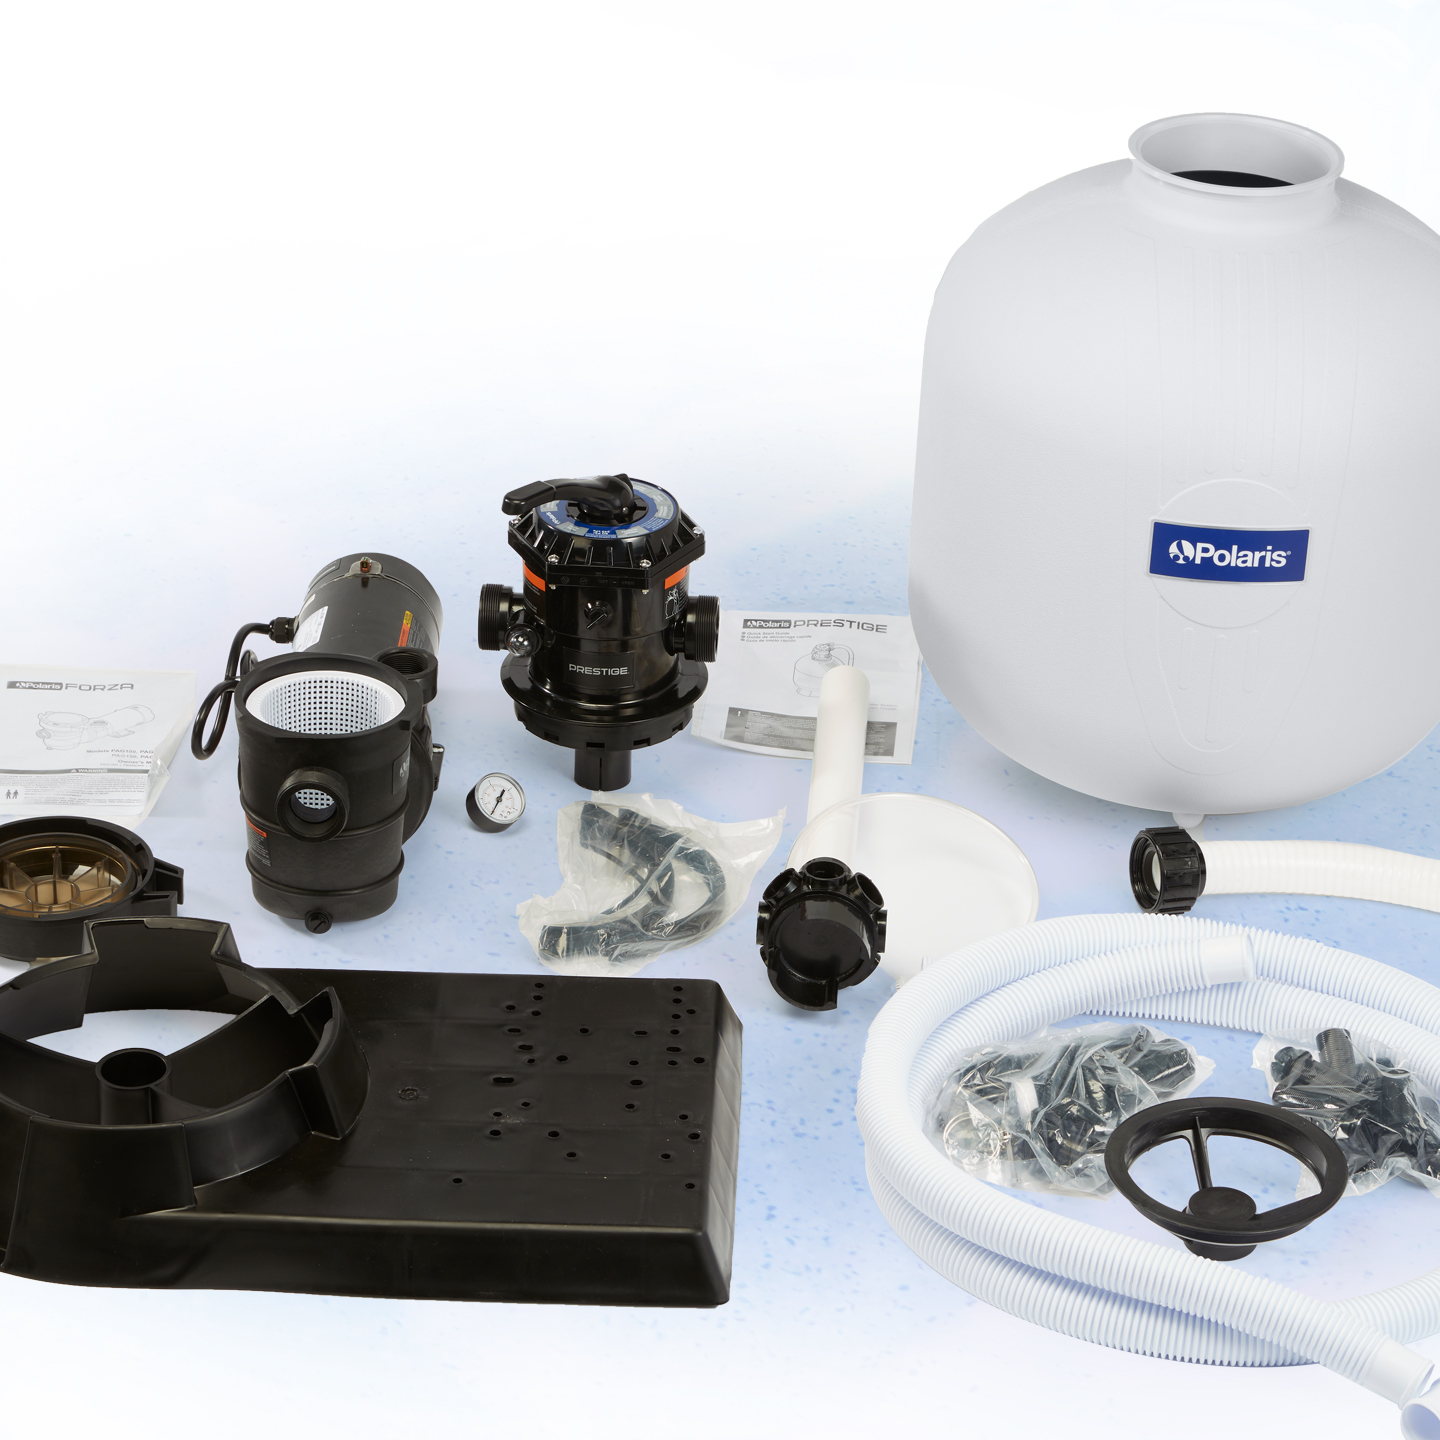 Prestige Sand Filter with Forza Pump, top mount multiport valve, system base, and all hoses with adapters